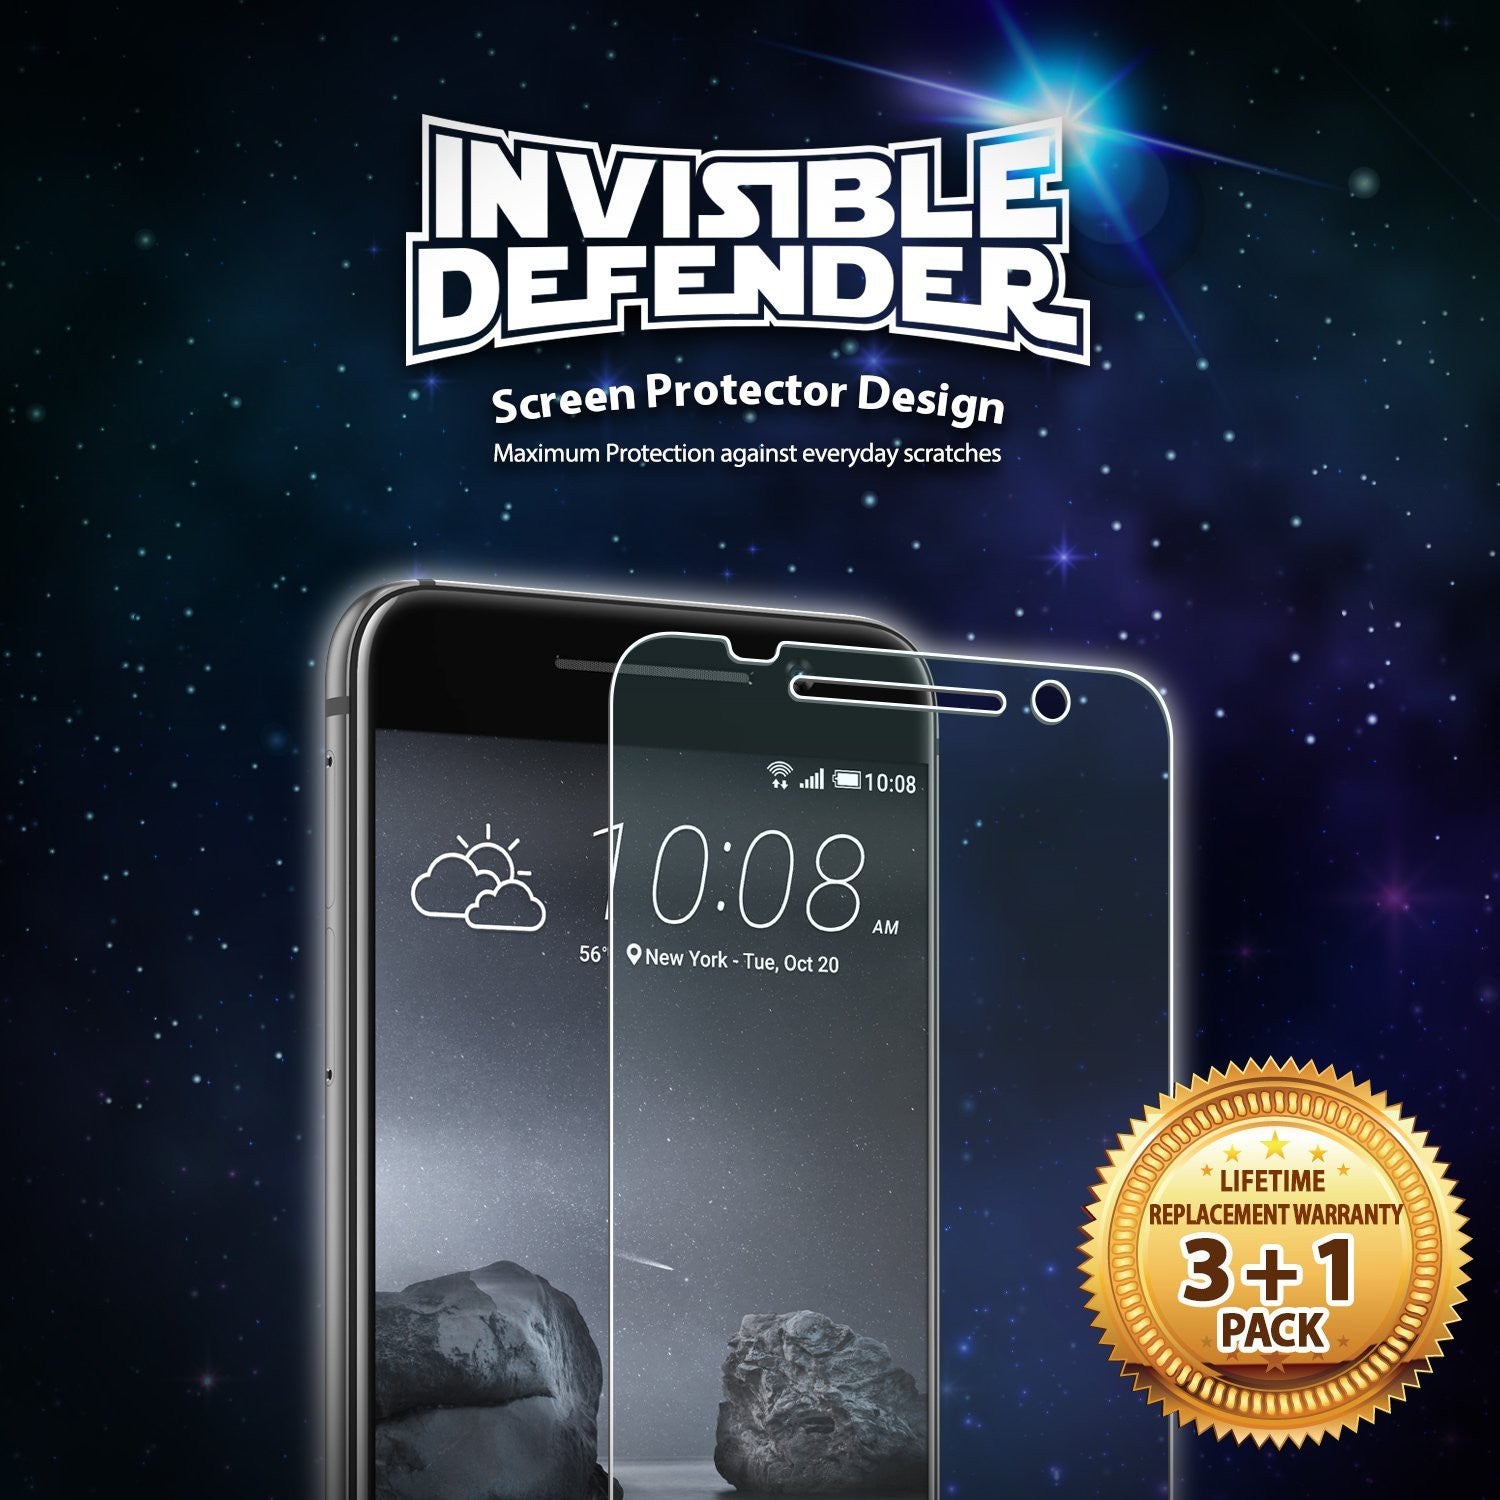 htc one a9 invisible defender 3+1 pack